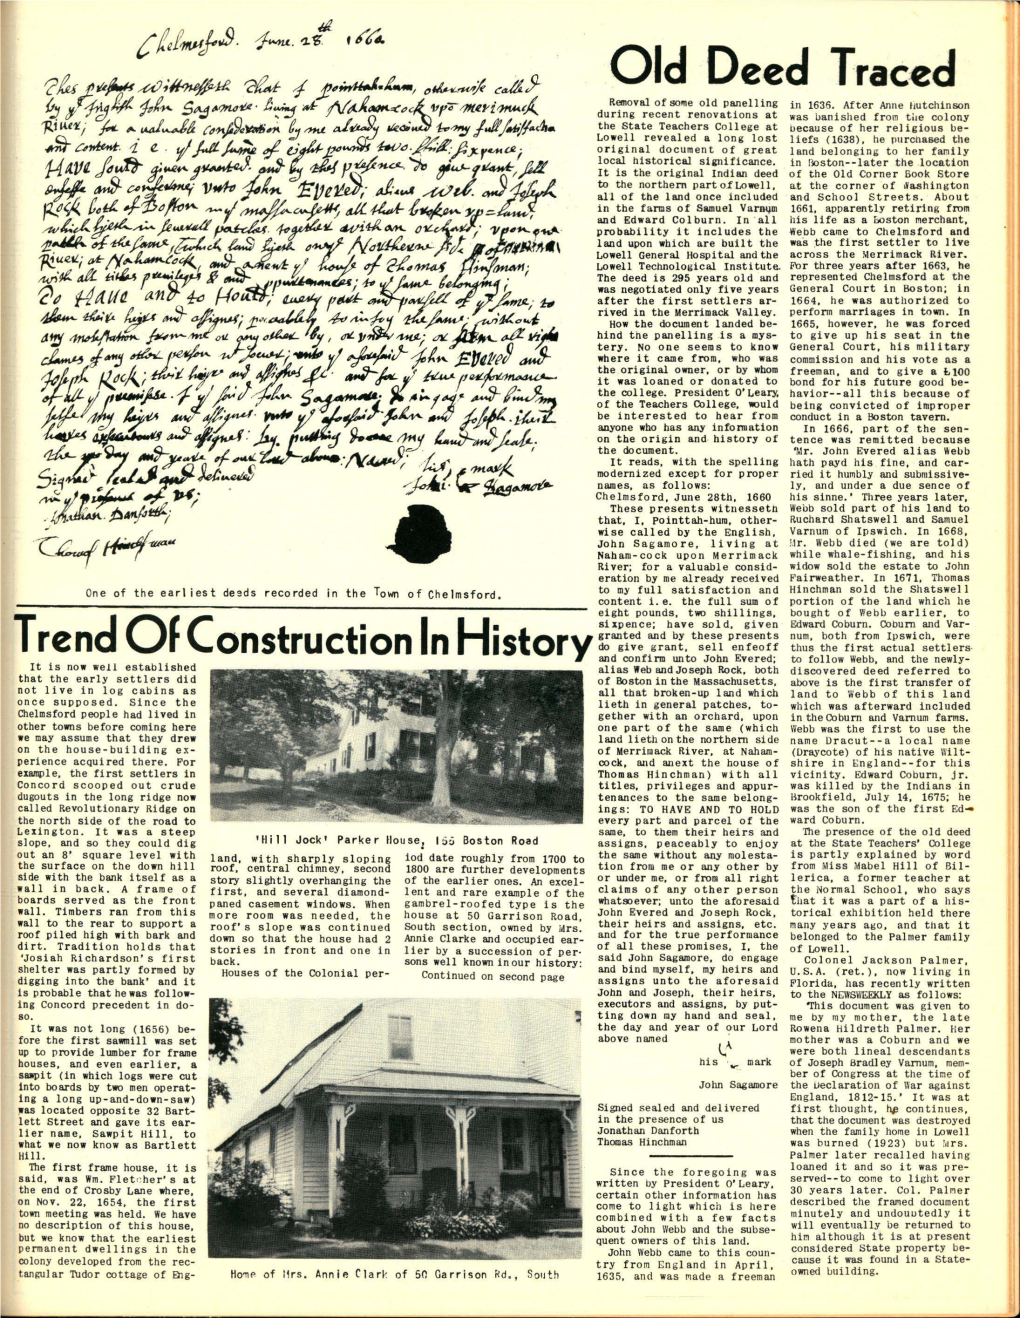 Houses of the Colonial Per- Continued on Second Page U.S.A